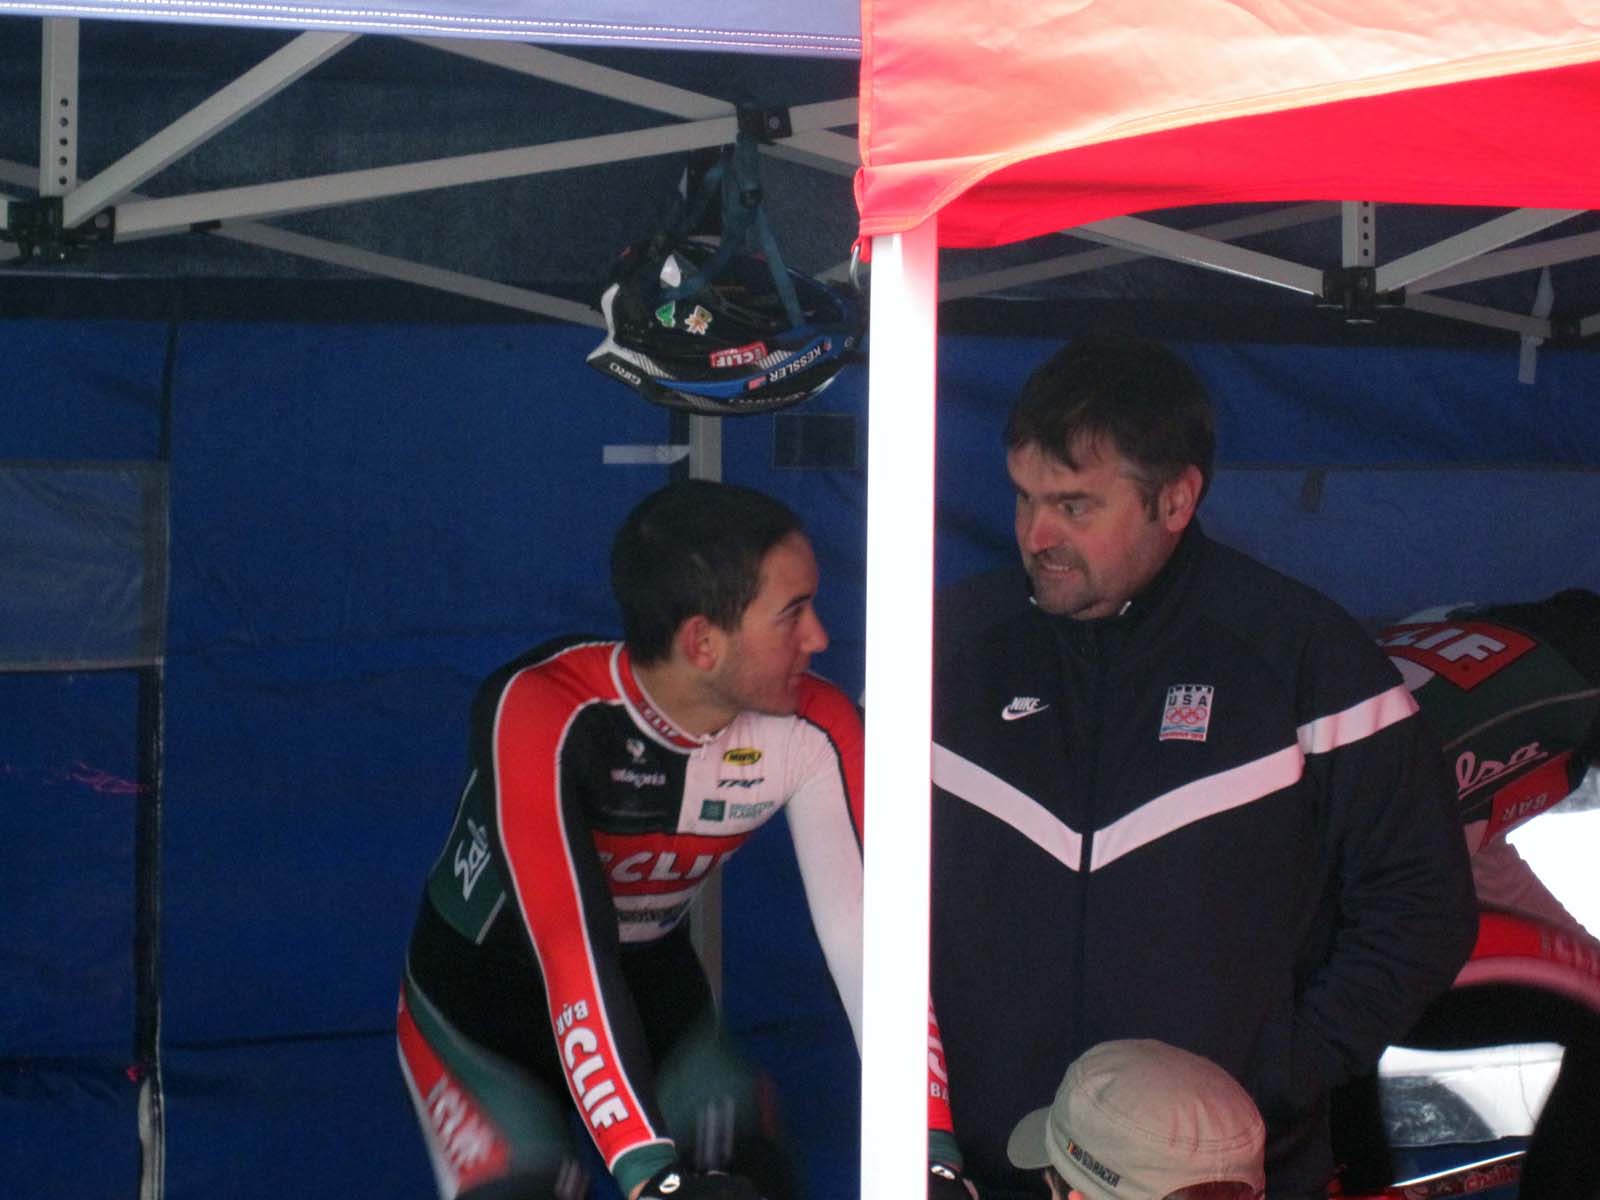 Chris Fox, an affable soigneur, keeps the riders in good spirits. ? Nathan Phillips